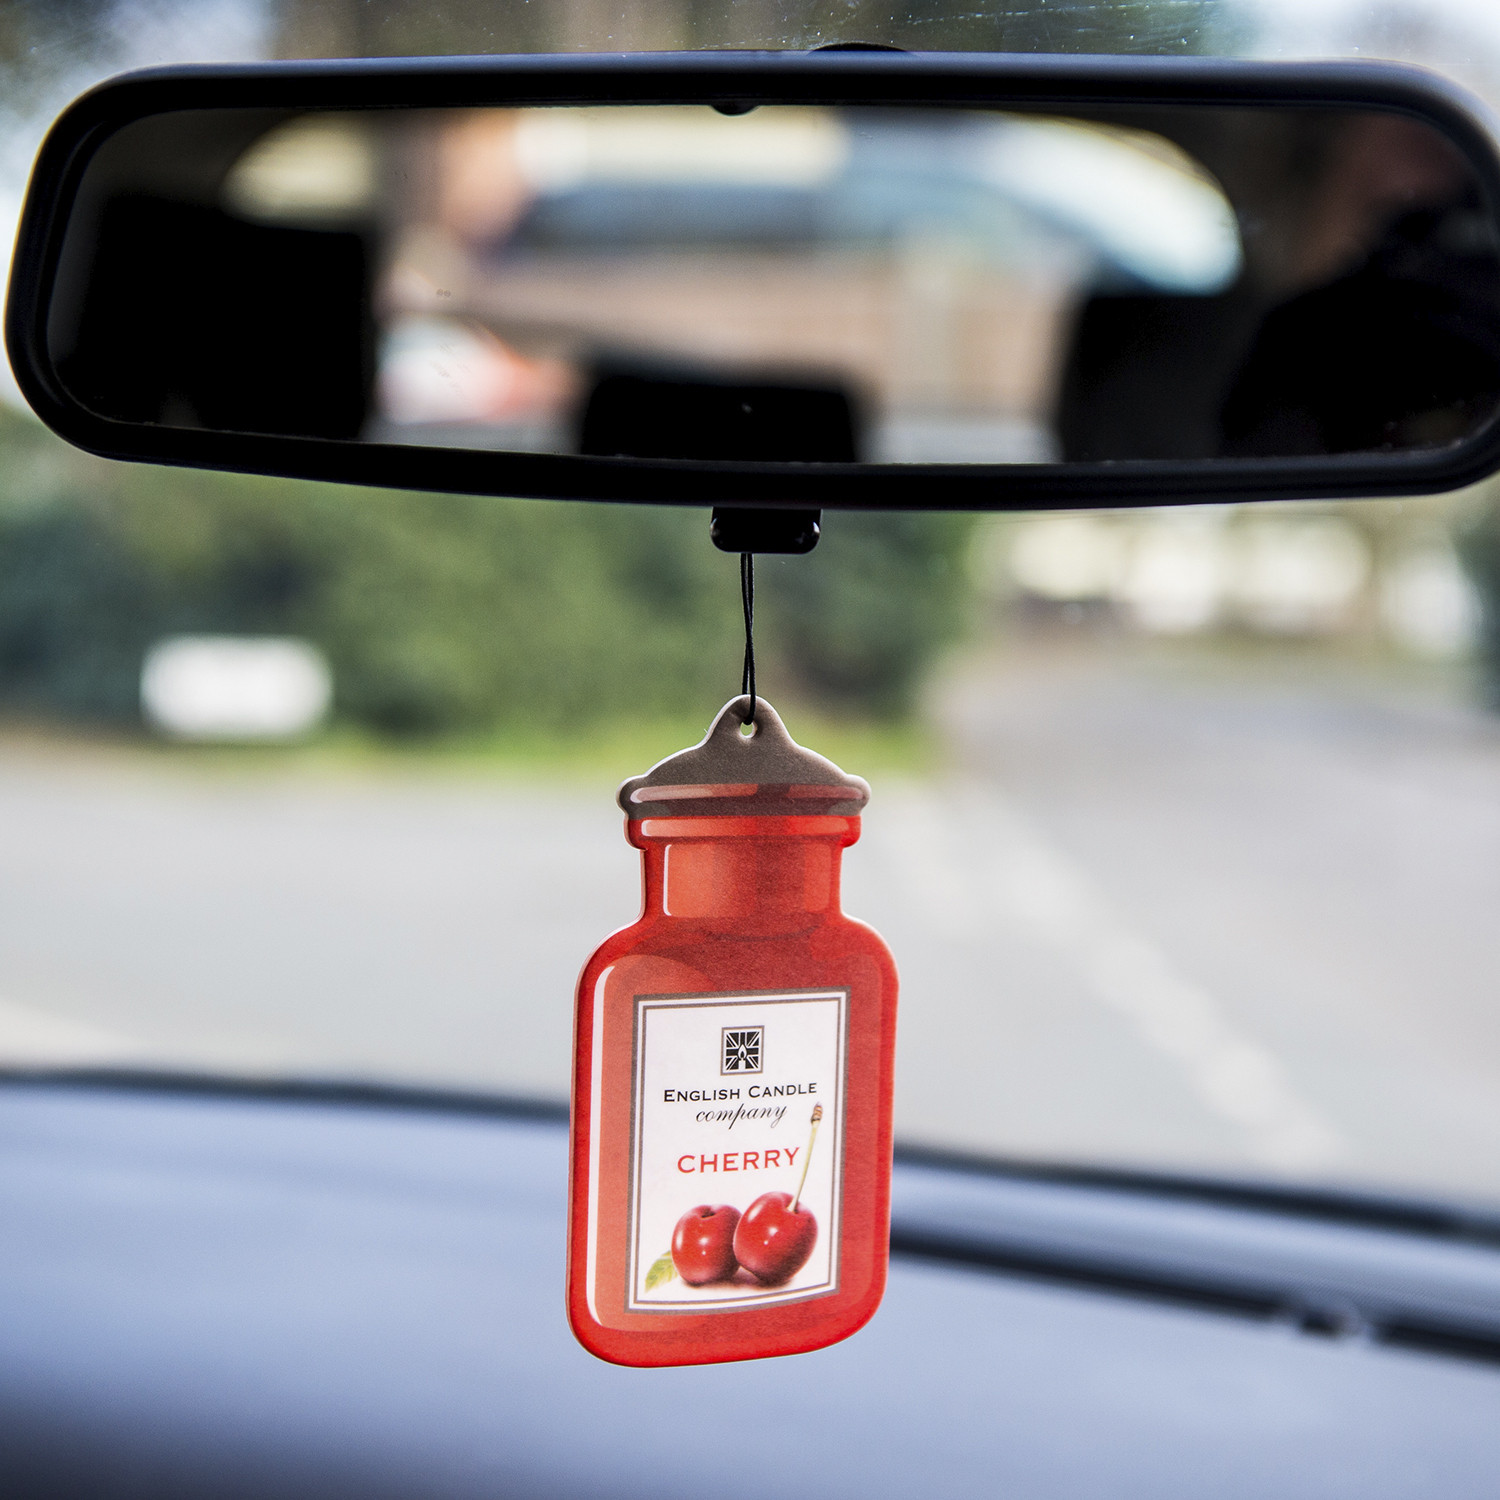 English Candle Company Cherry 2D Car Air Freshener Image 2